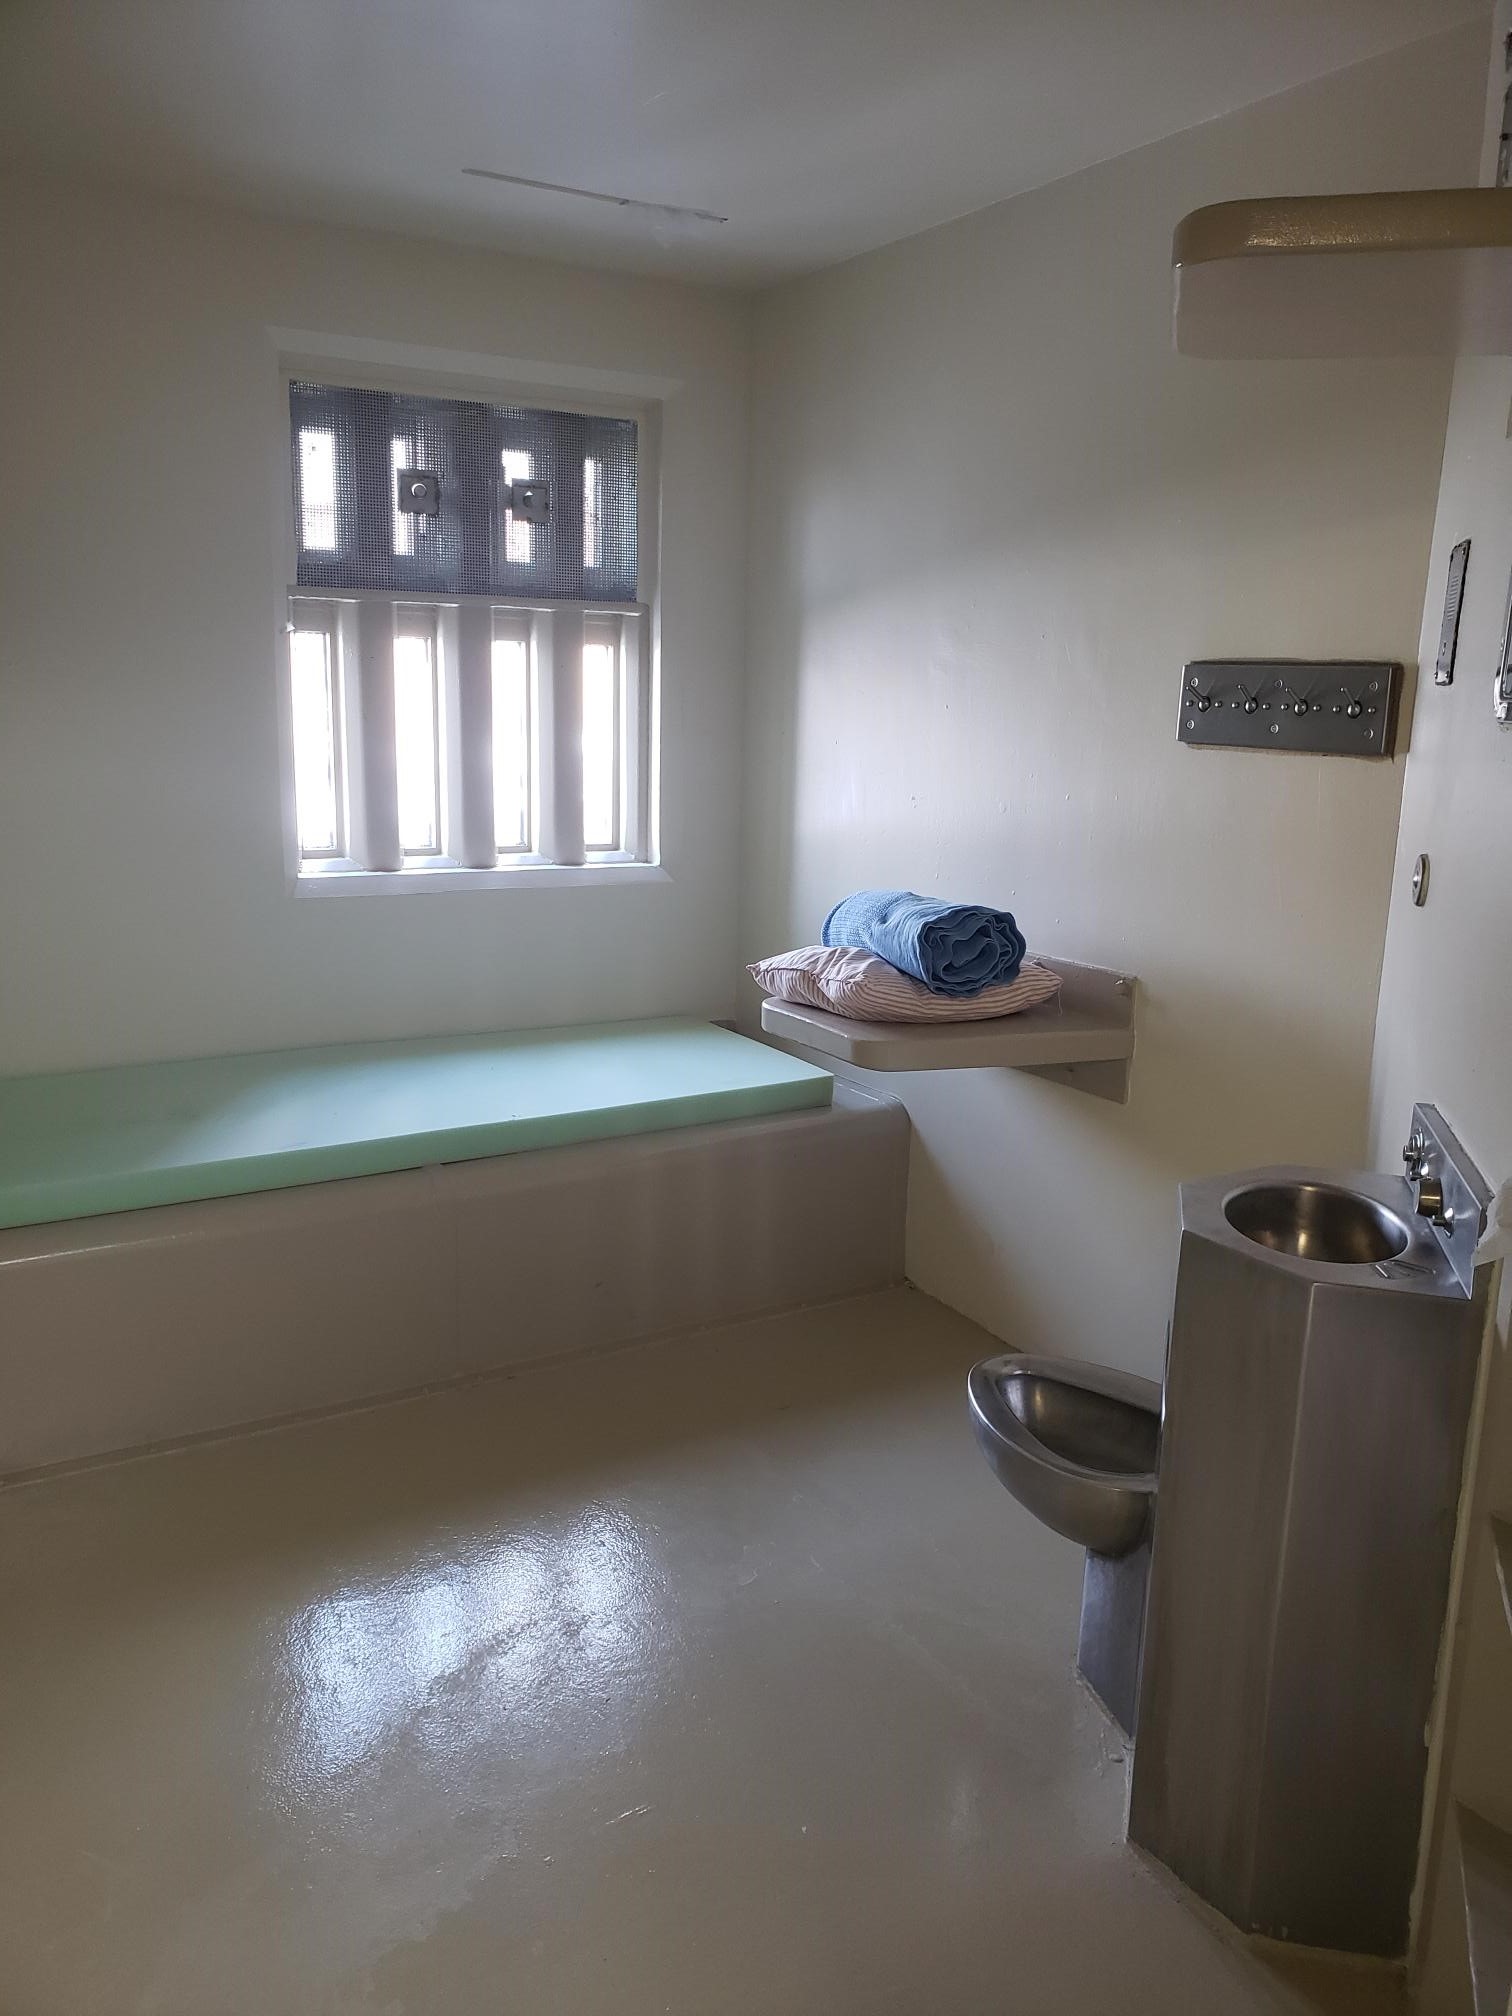 A photo of a medical isolation cell at the Regional Reception Centre.